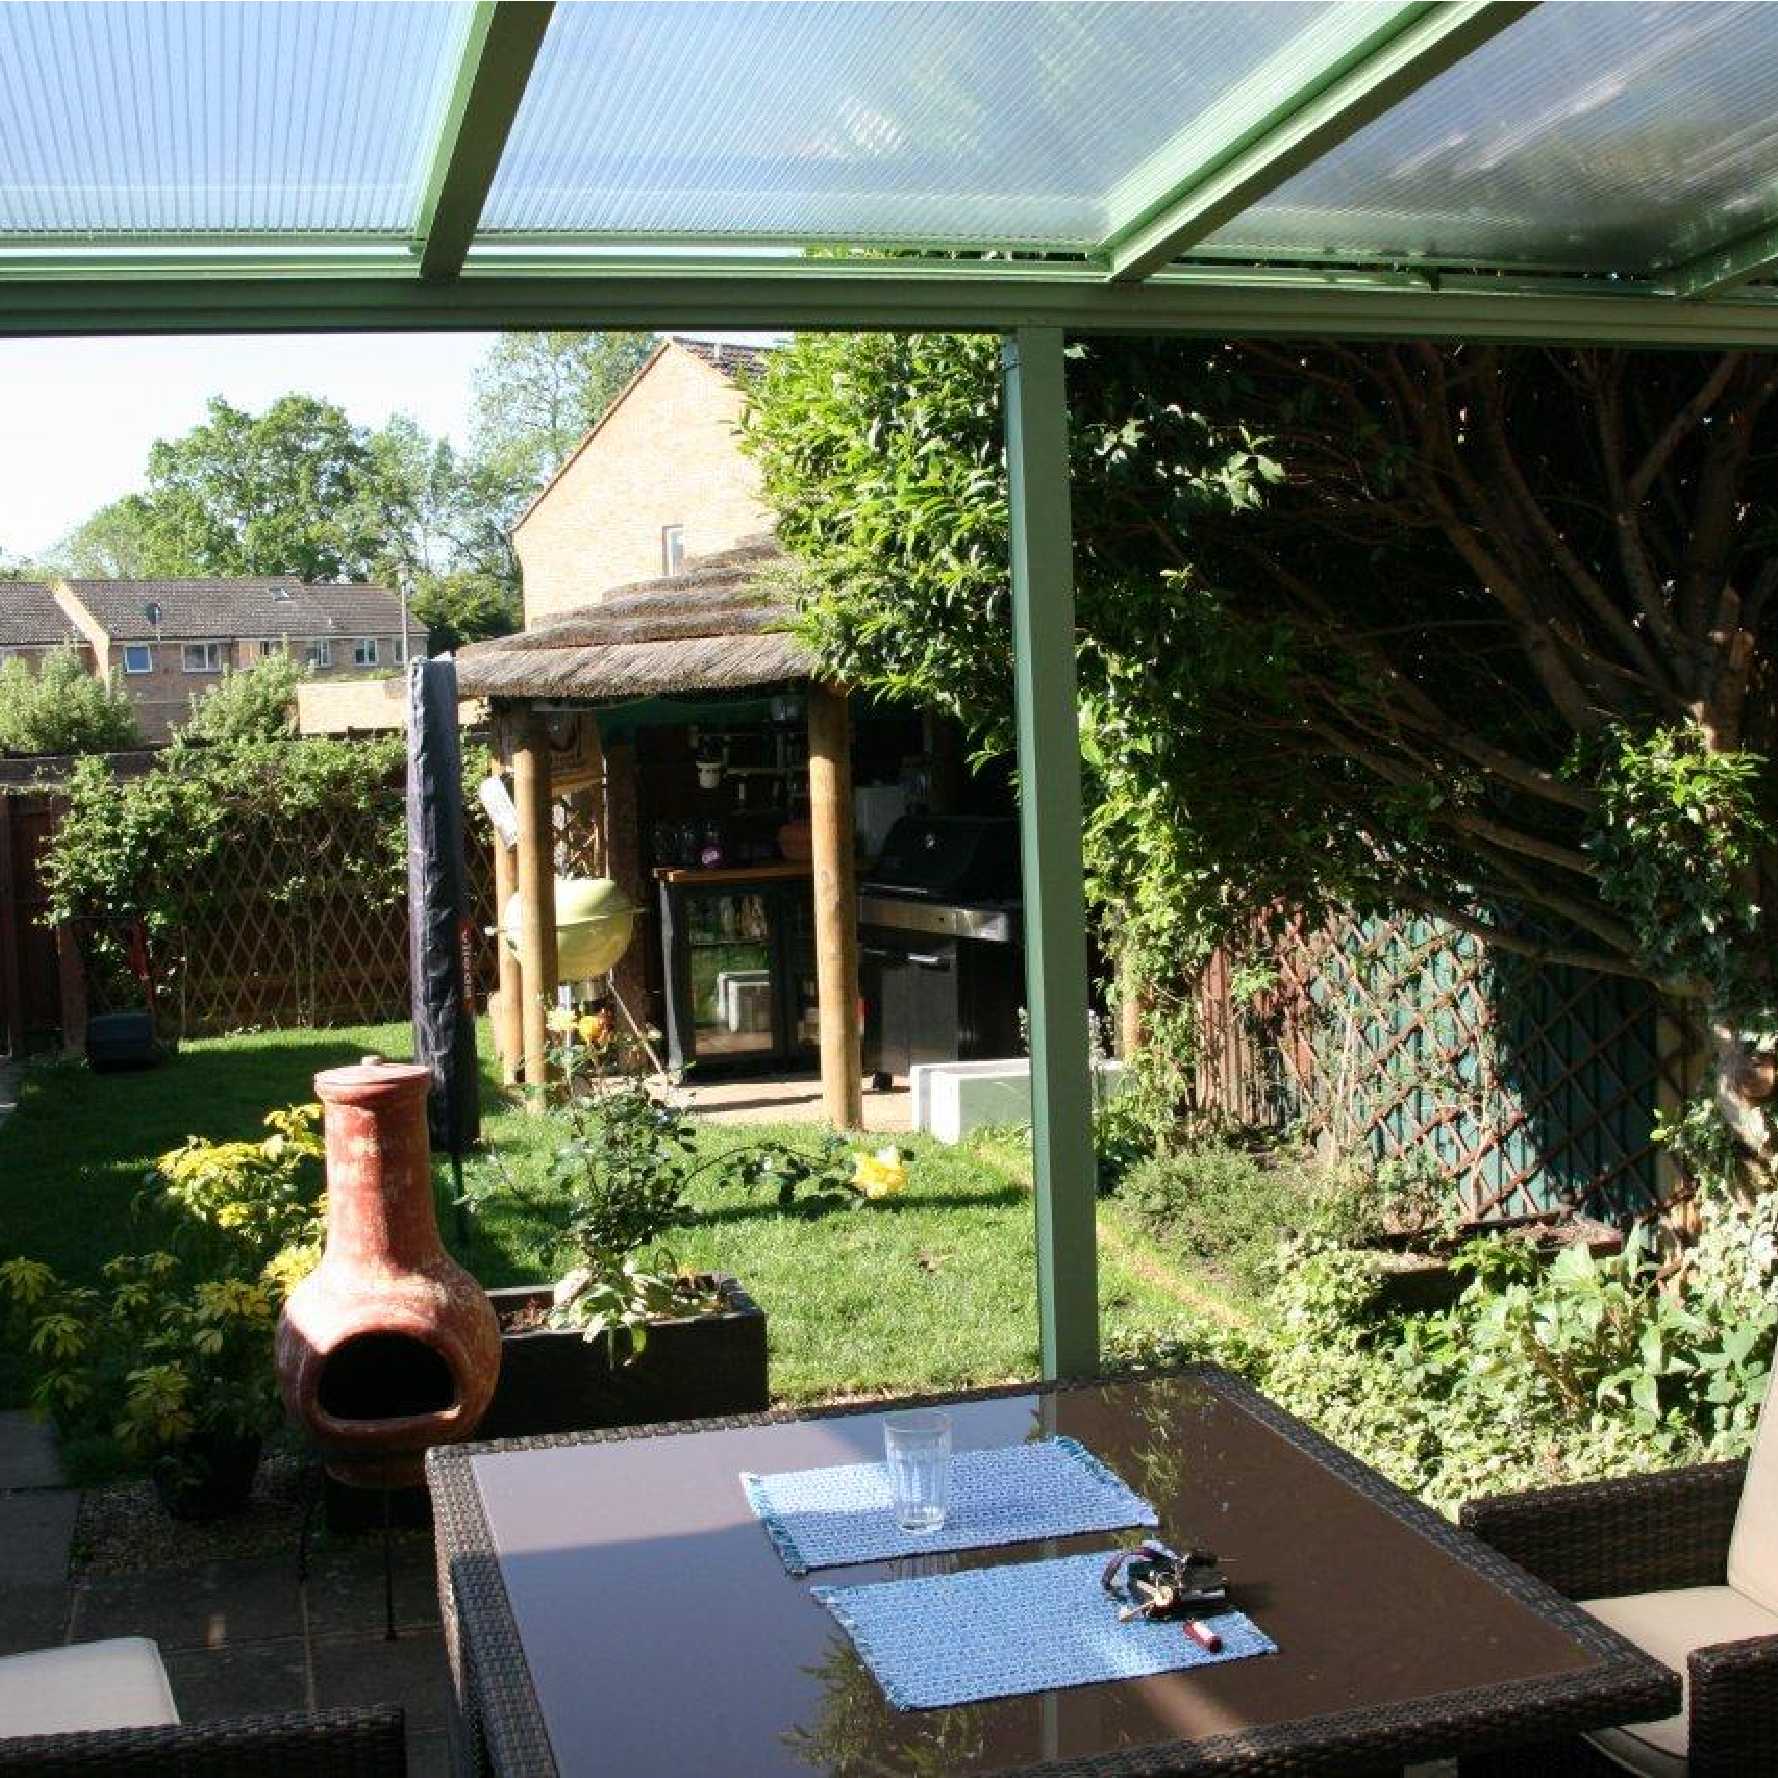 Affordable Omega Smart Lean-To Canopy, White with 16mm Polycarbonate Glazing - 7.4m (W) x 4.5m (P), (4) Supporting Posts